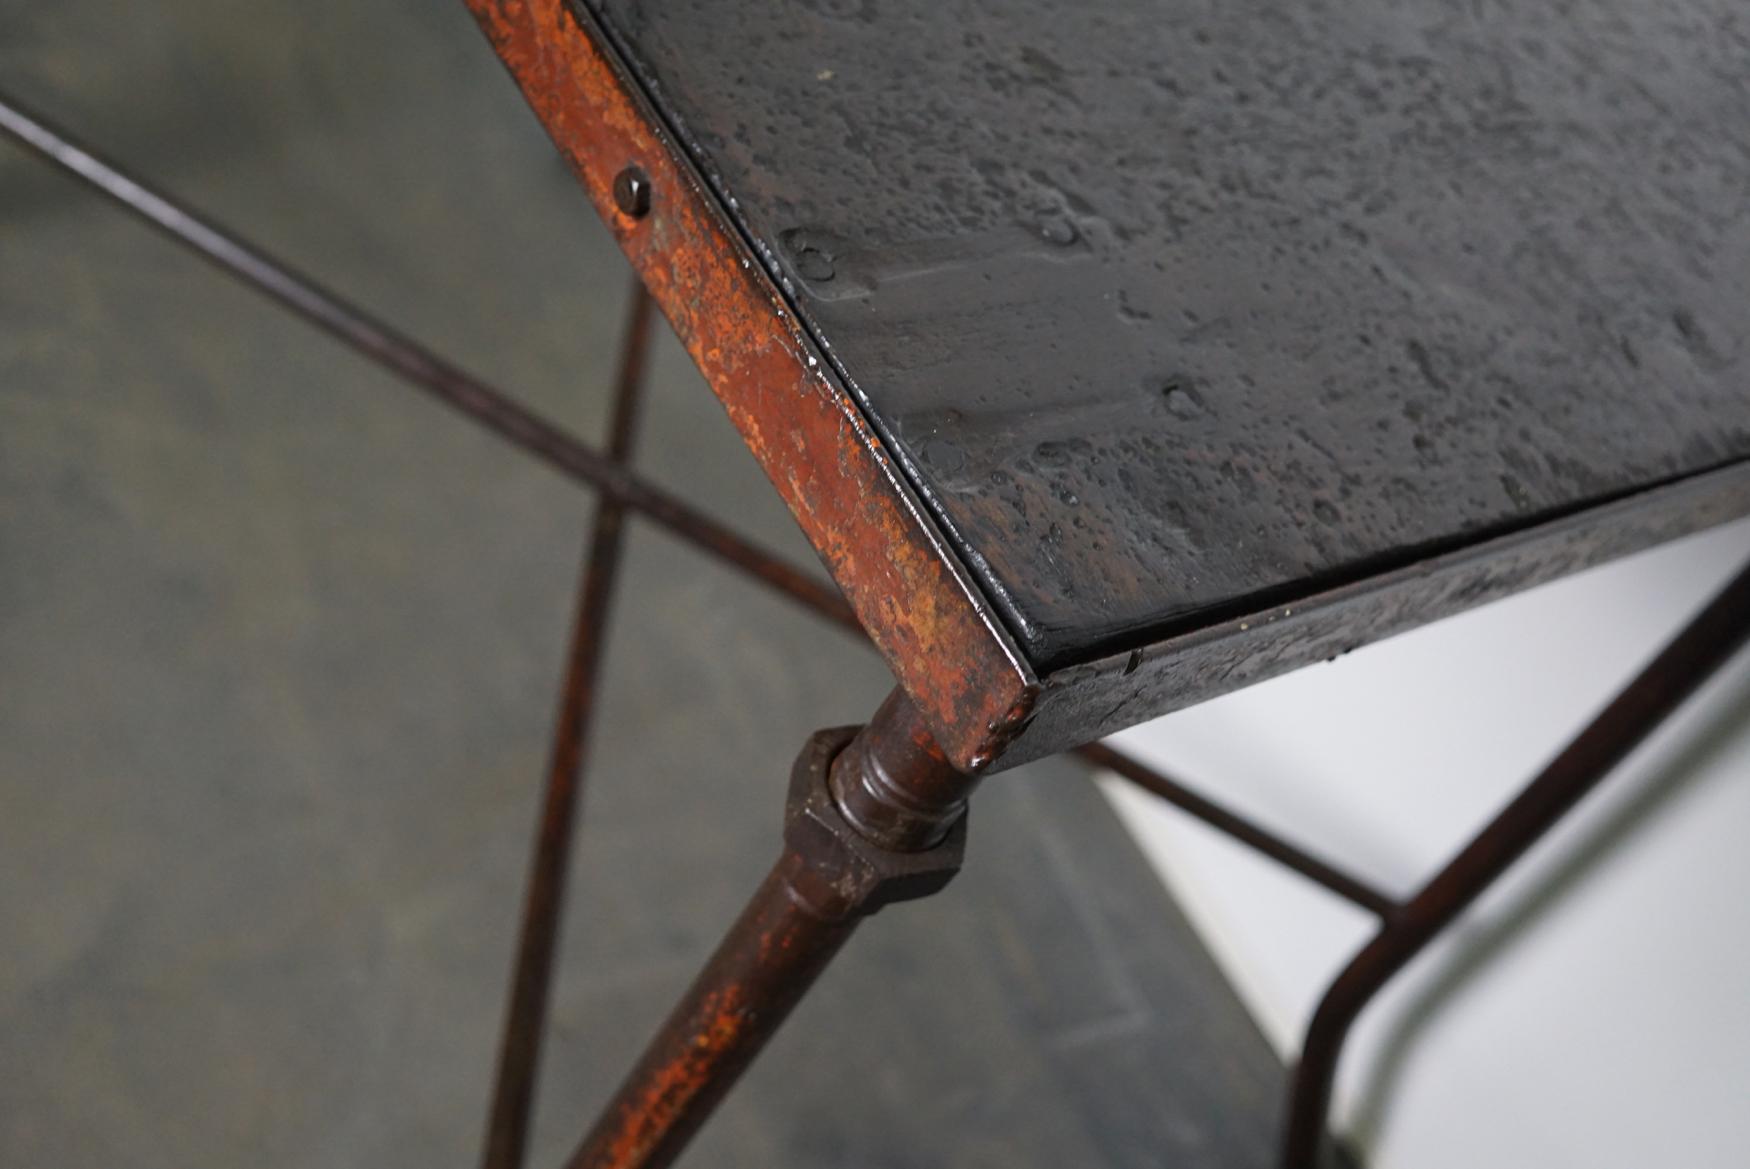 This steel workshop table was designed and made circa 1950s in Germany. It has a hardwood top and a steel frame.